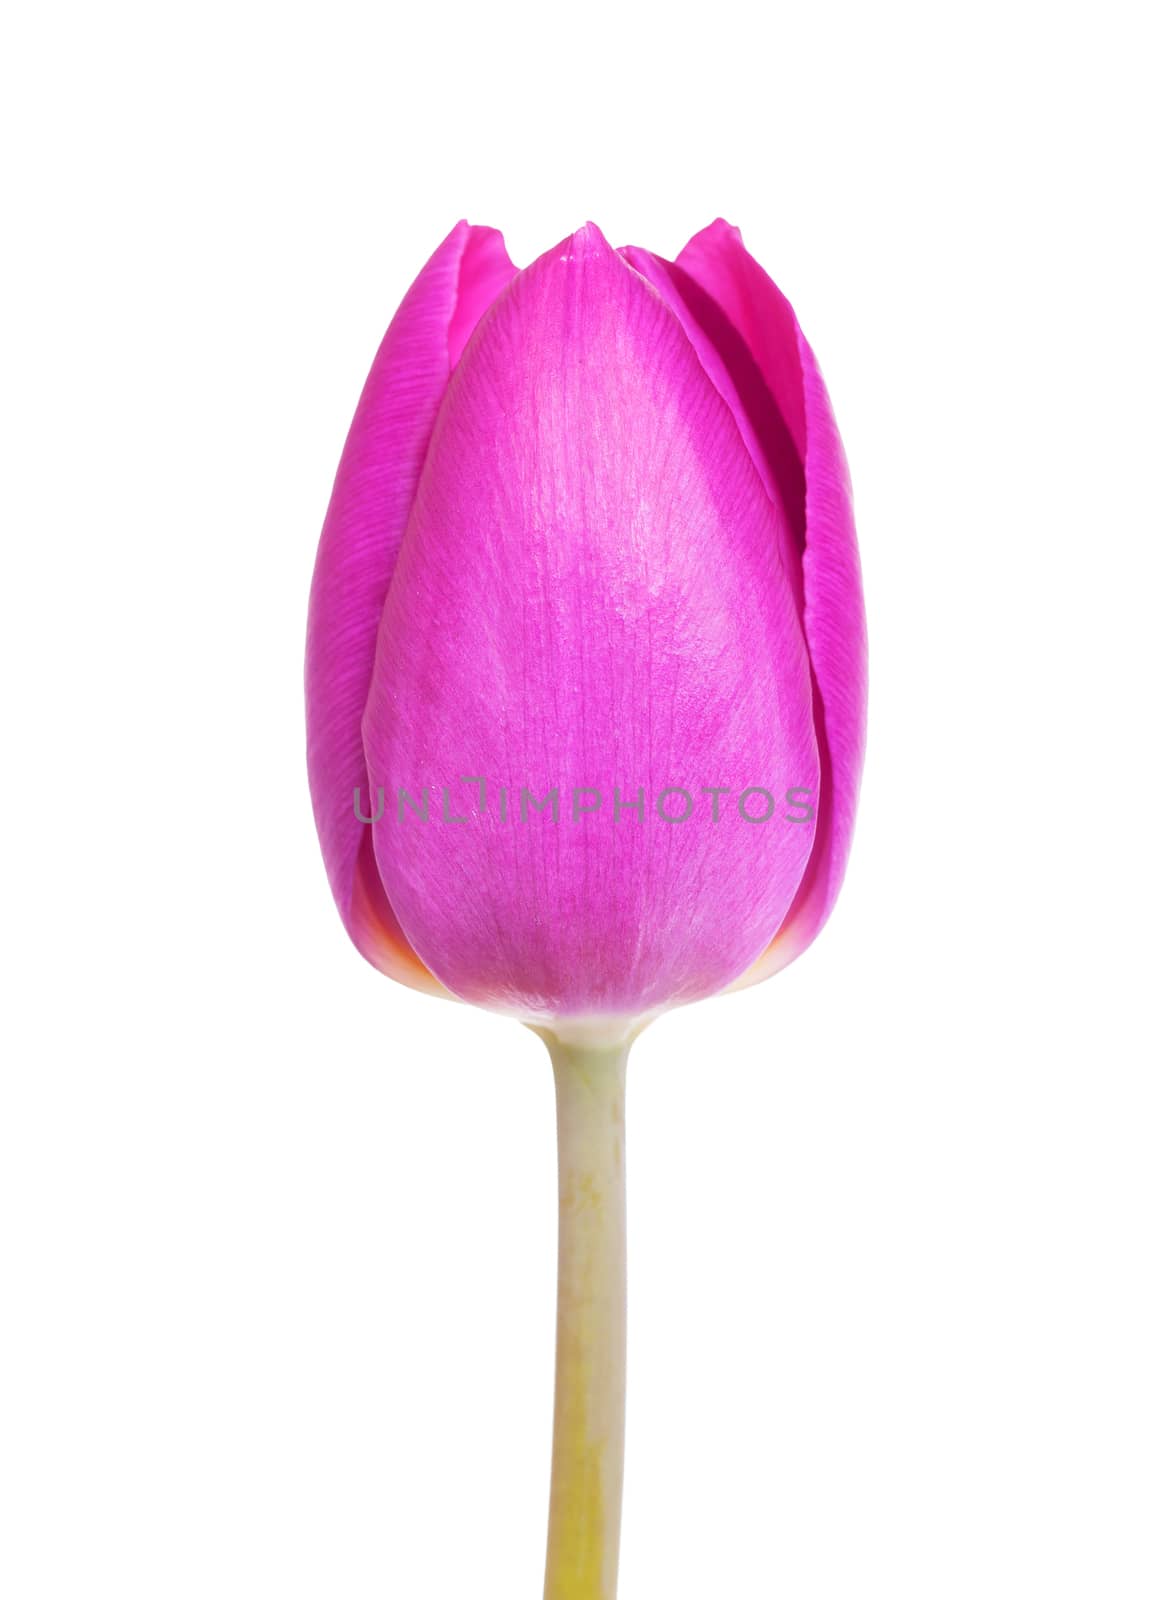 Purple tulip isolated by michaklootwijk